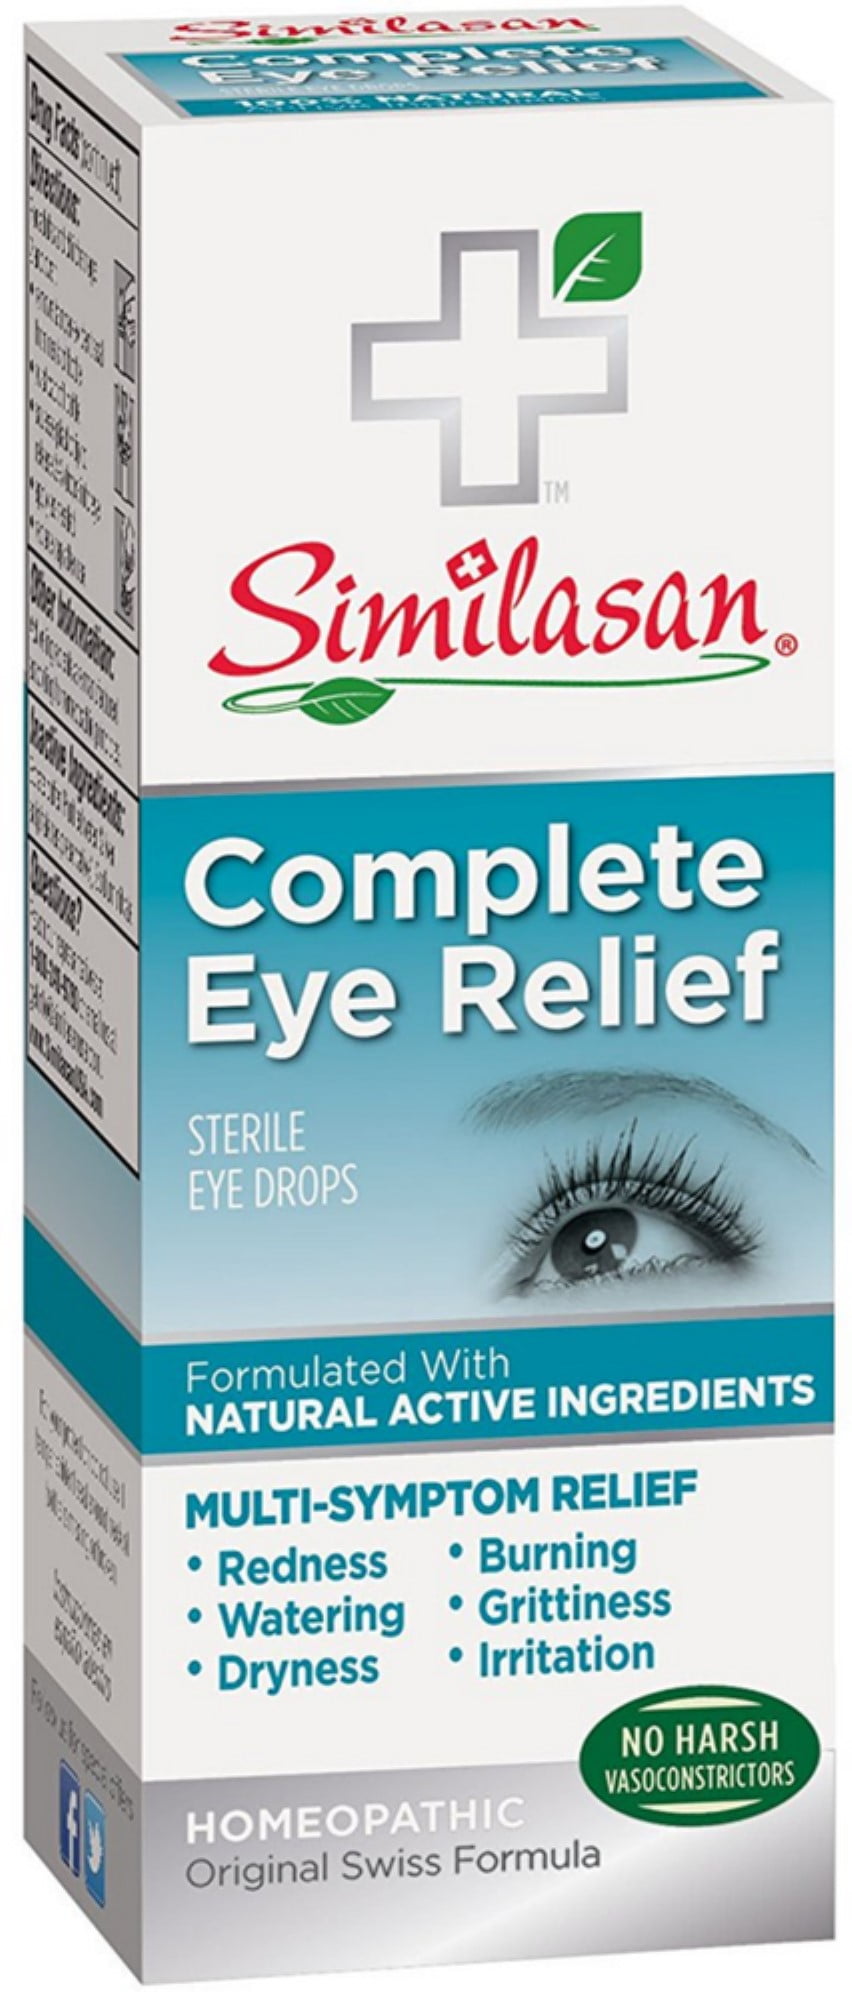 Similasan Complete Eye Relief Sterile Eye Drops 0.33 oz (Pack of 2